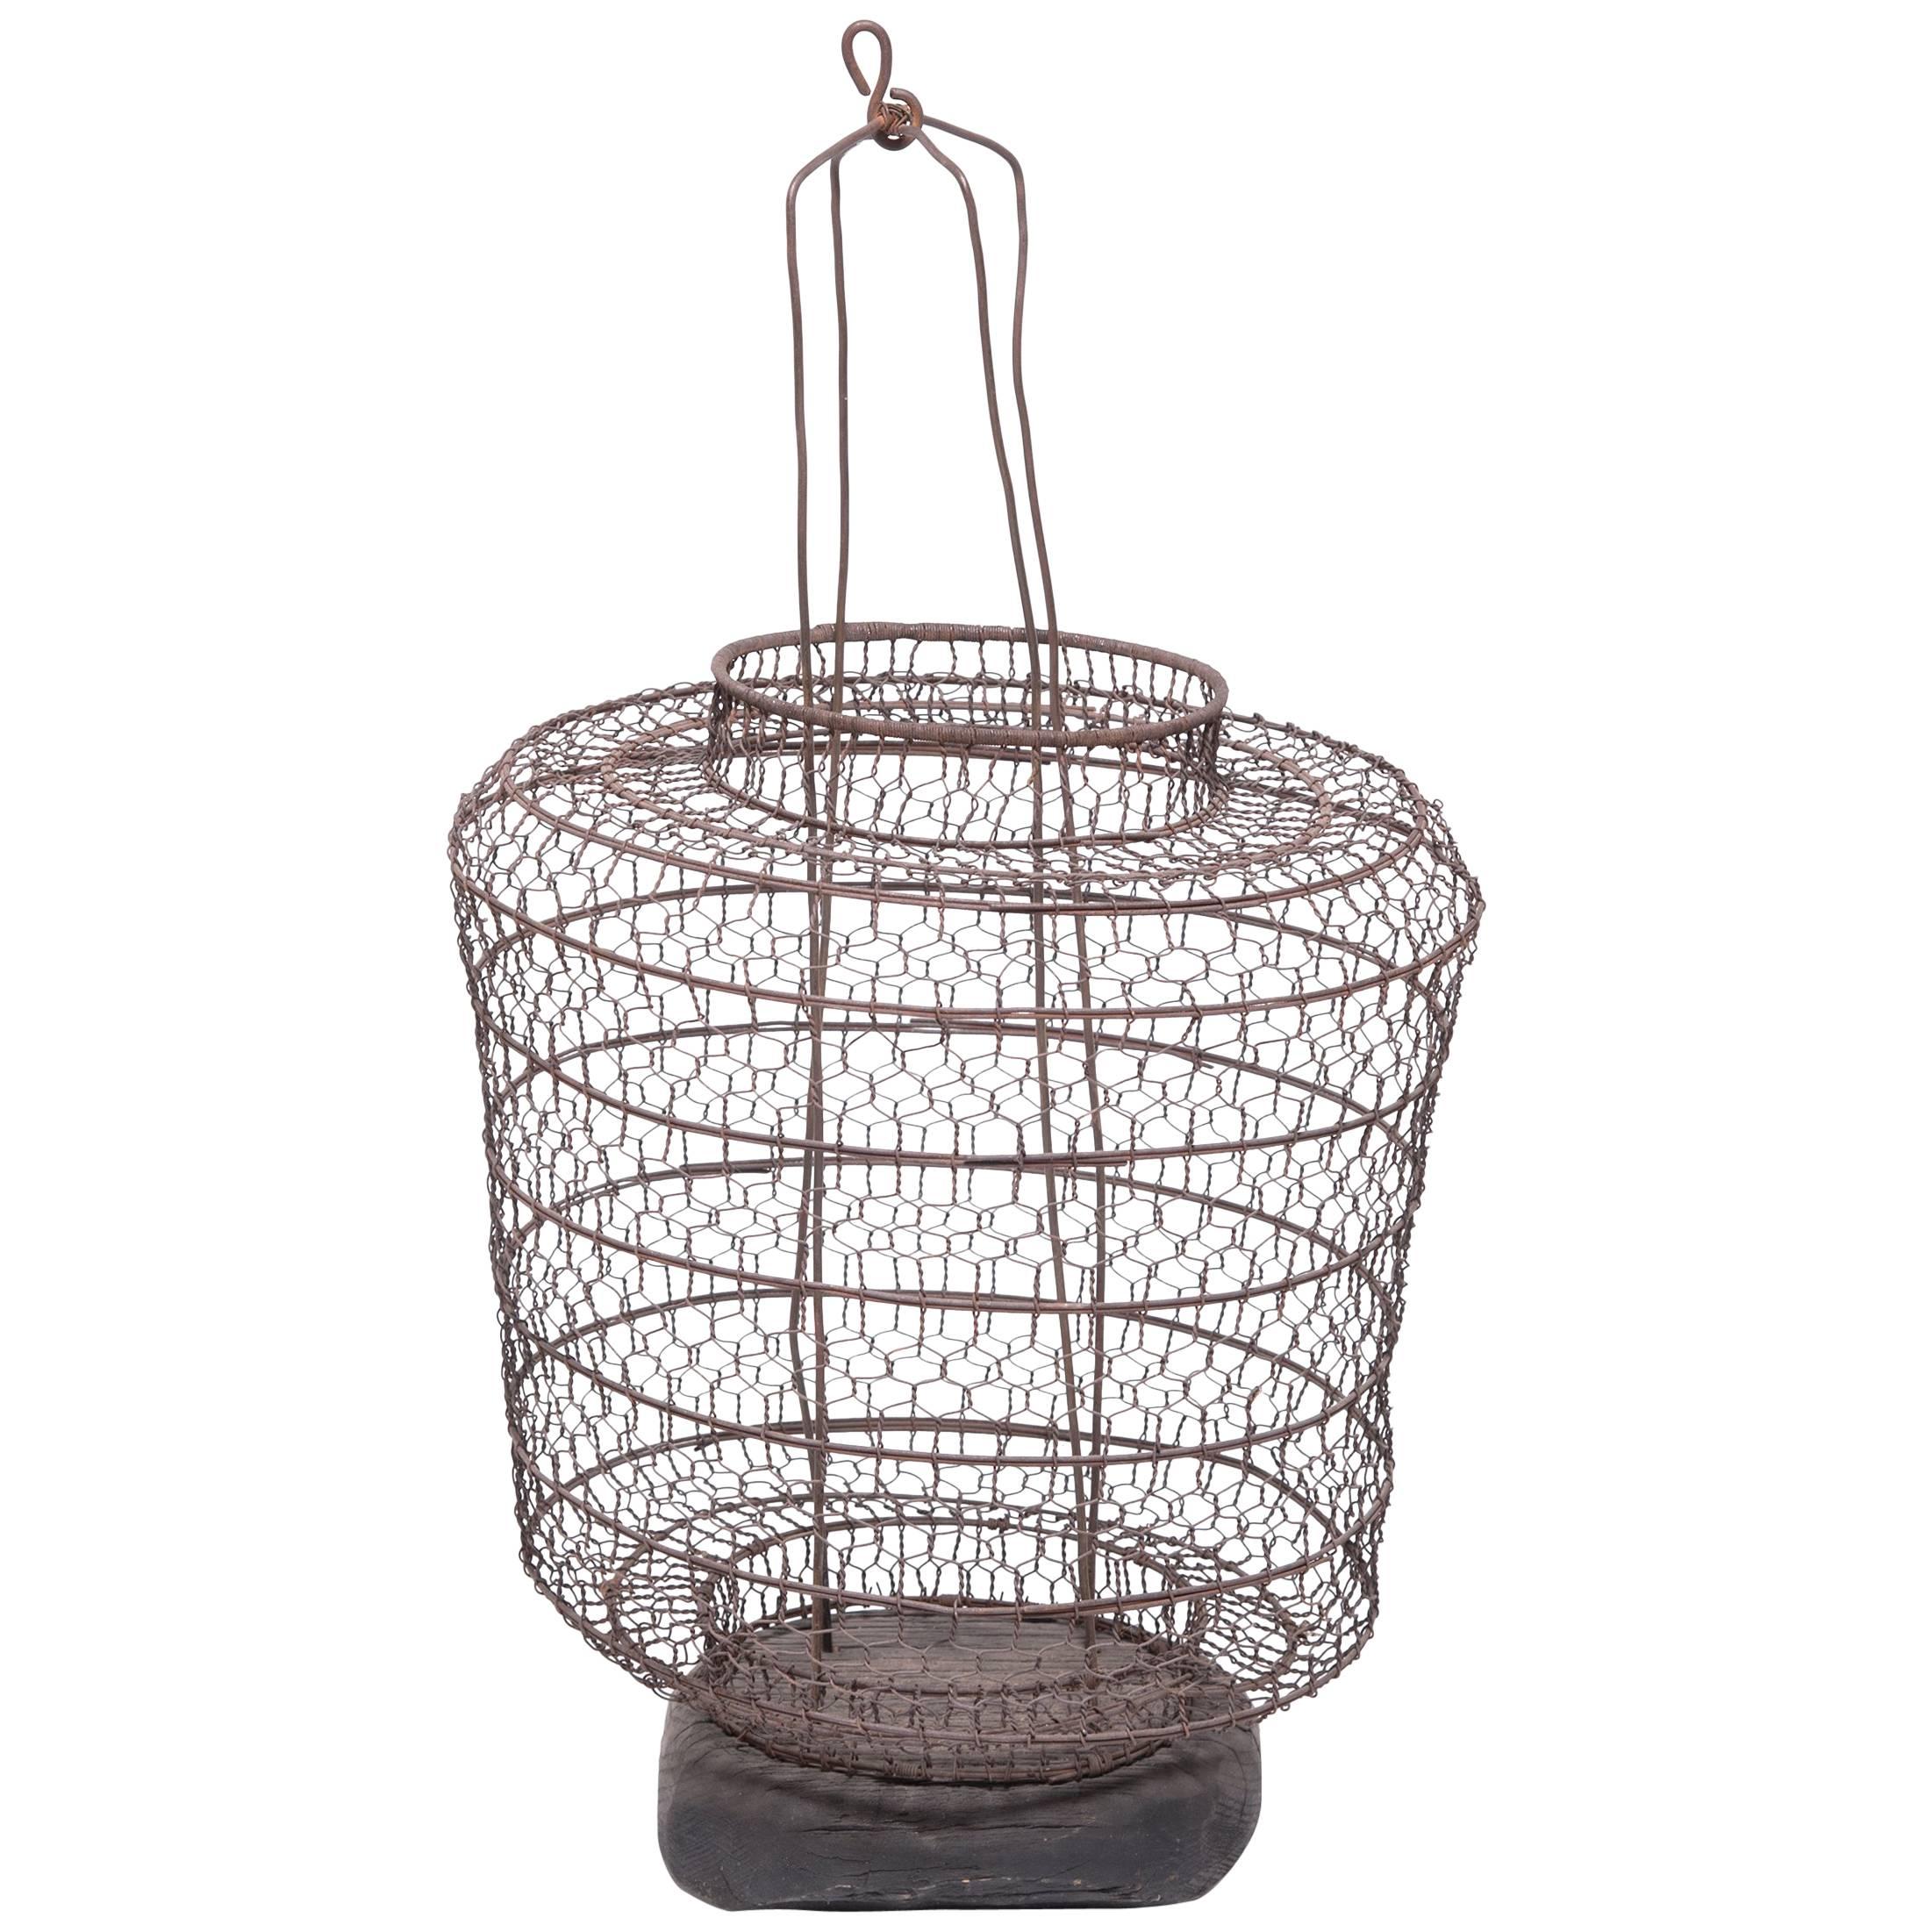 19th Century Chinese Twisted Wire Lantern